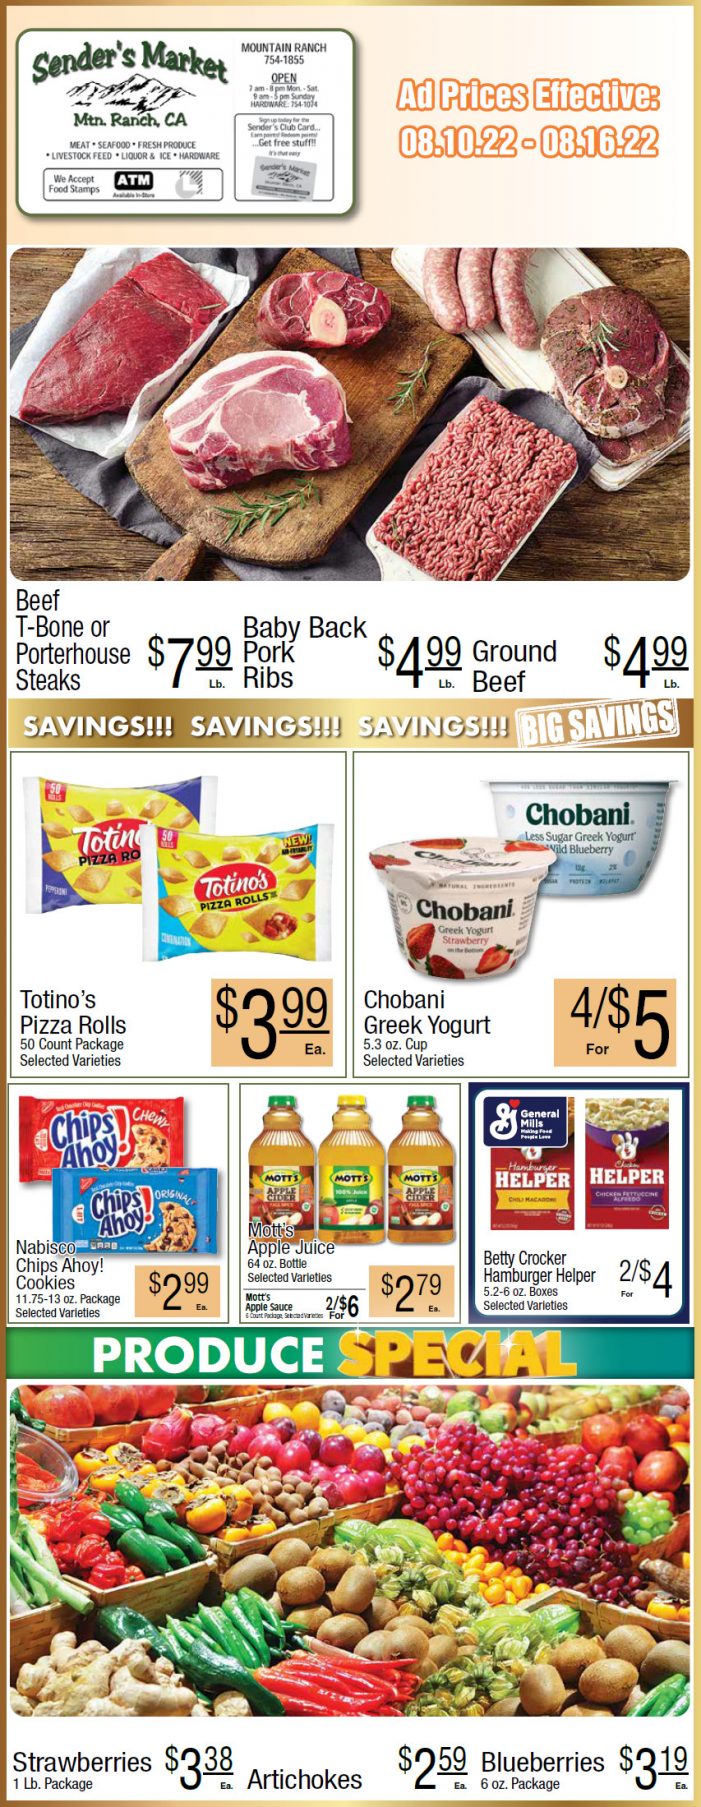 Sender’s Market Weekly Ad & Grocery Specials Through August 16th! Shop Local & Save!